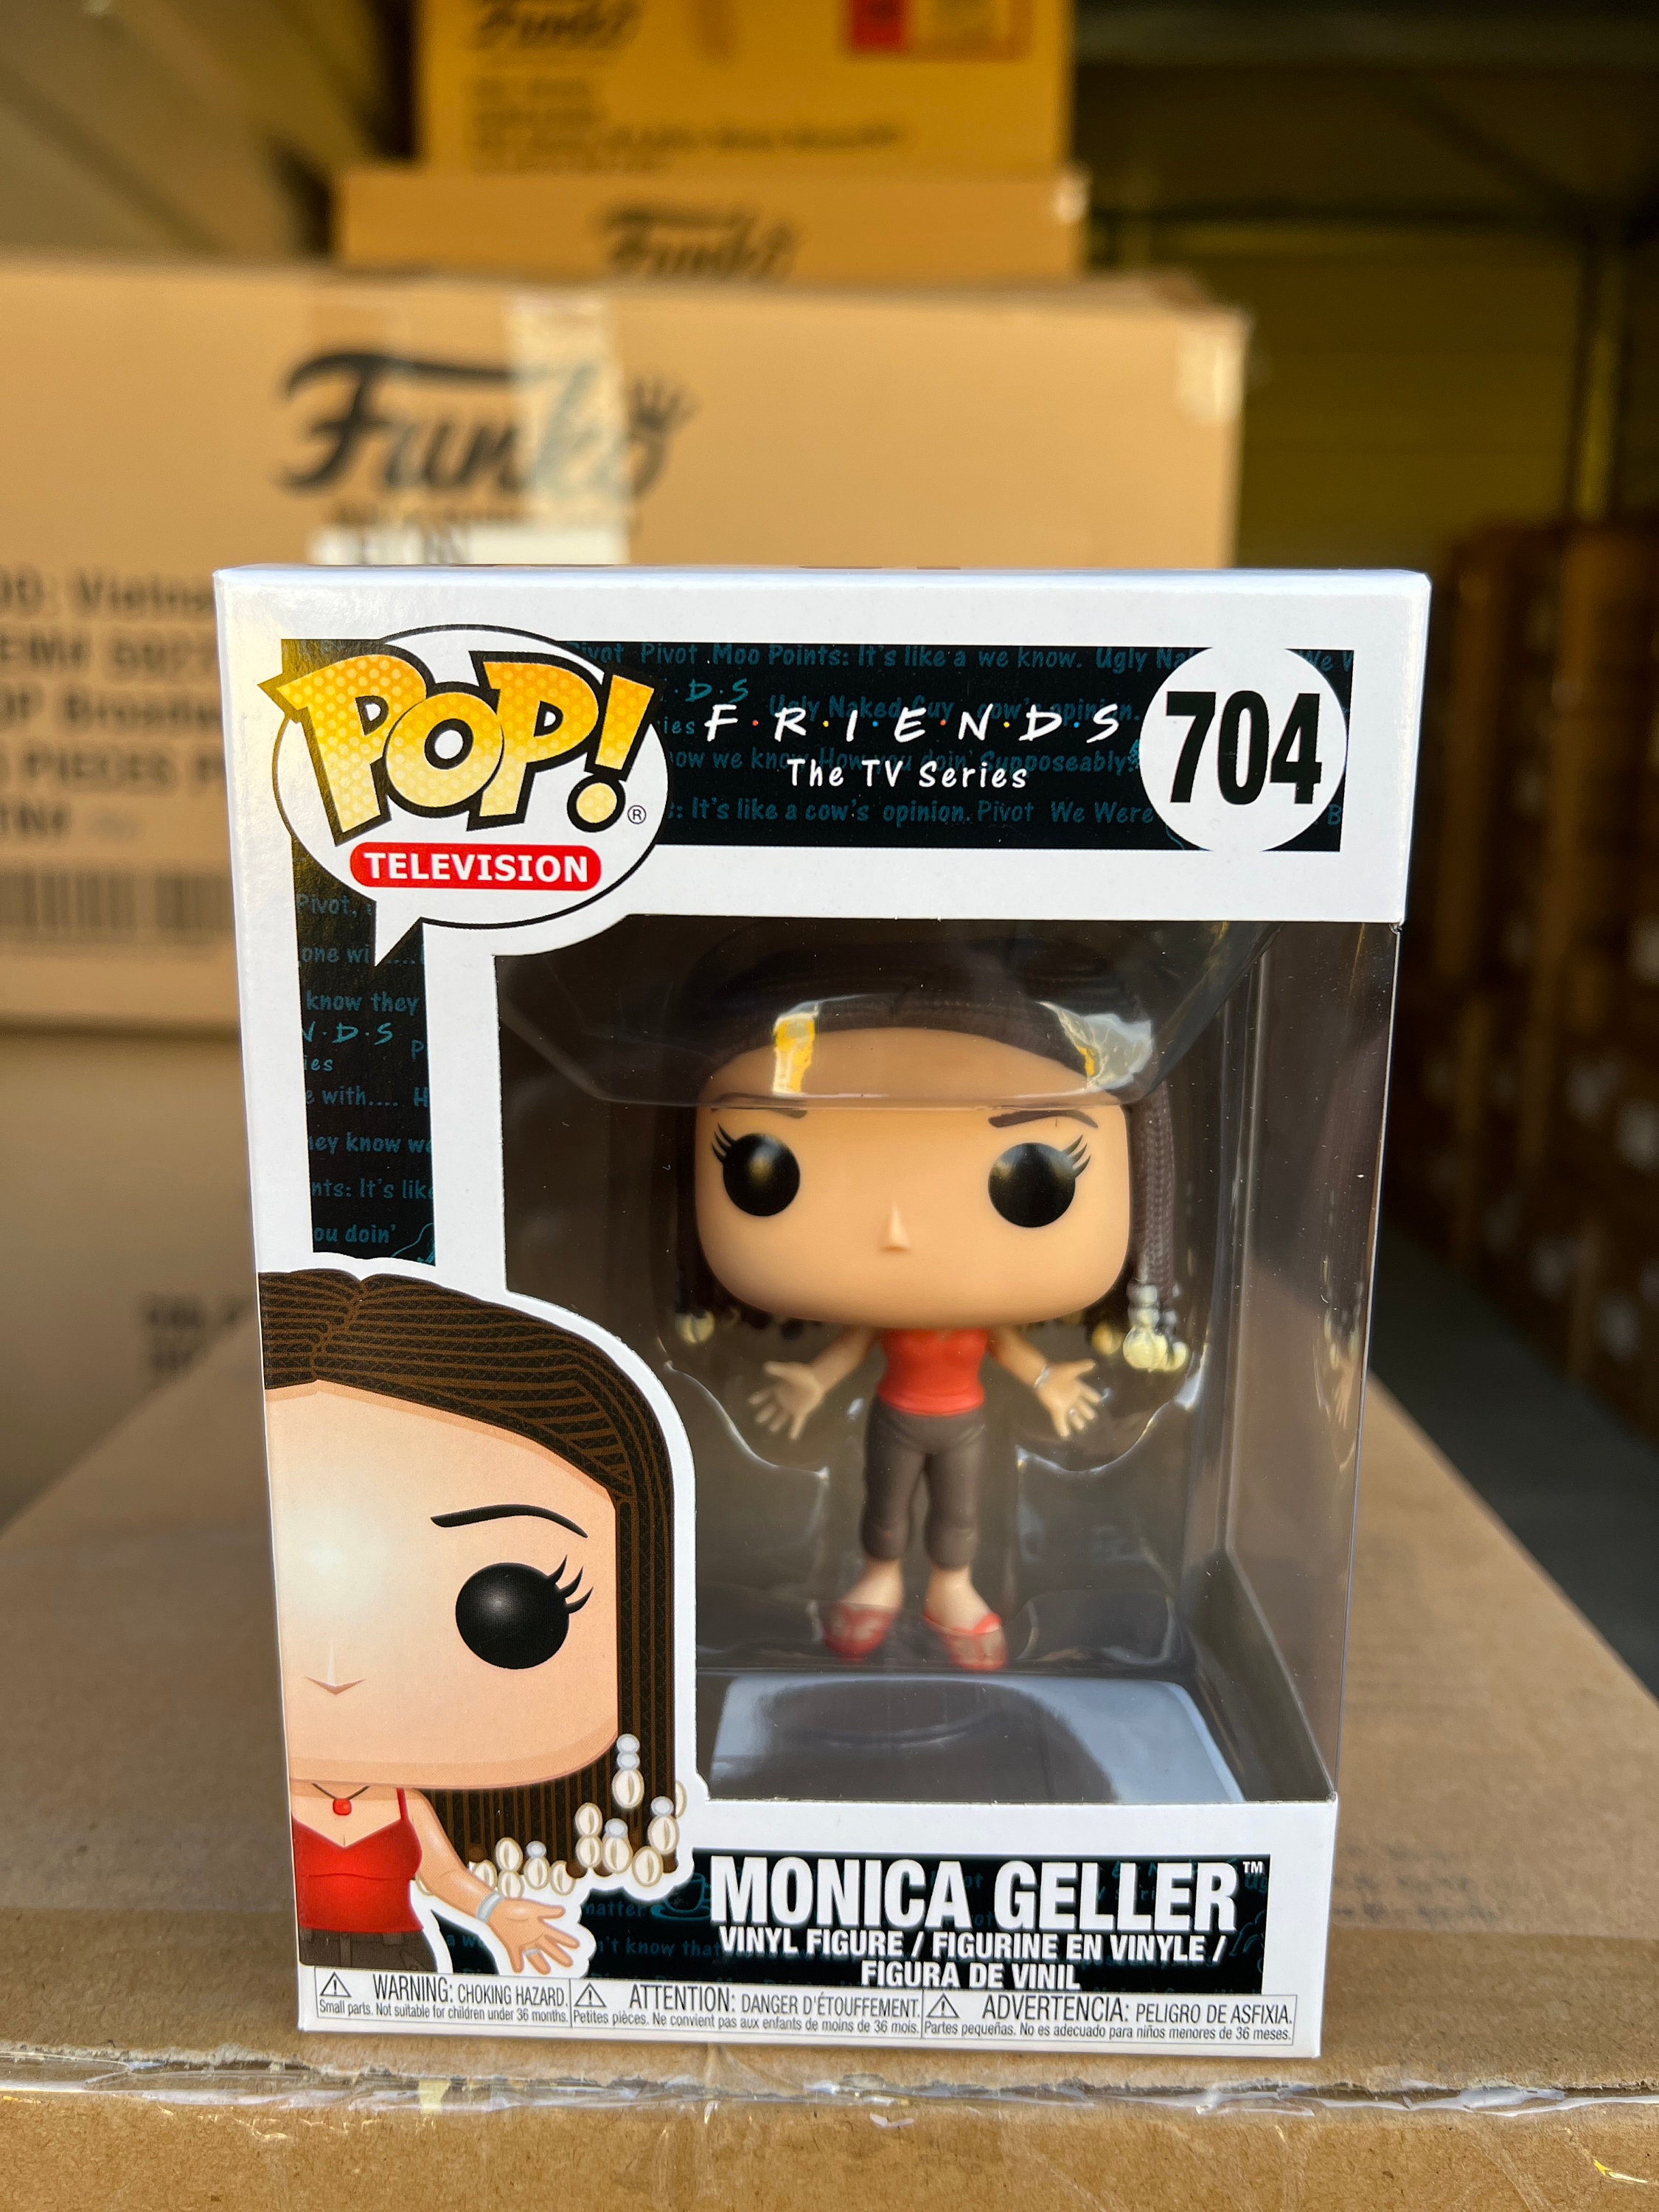  Funko Bitty Pop! Friends Mini Collectible Toys - Halloween  Costume Collection Monica Geller, Ross Geller, Chandler Bing & Mystery  Chase Figure (Styles May Vary) 4-Pack : Toys & Games